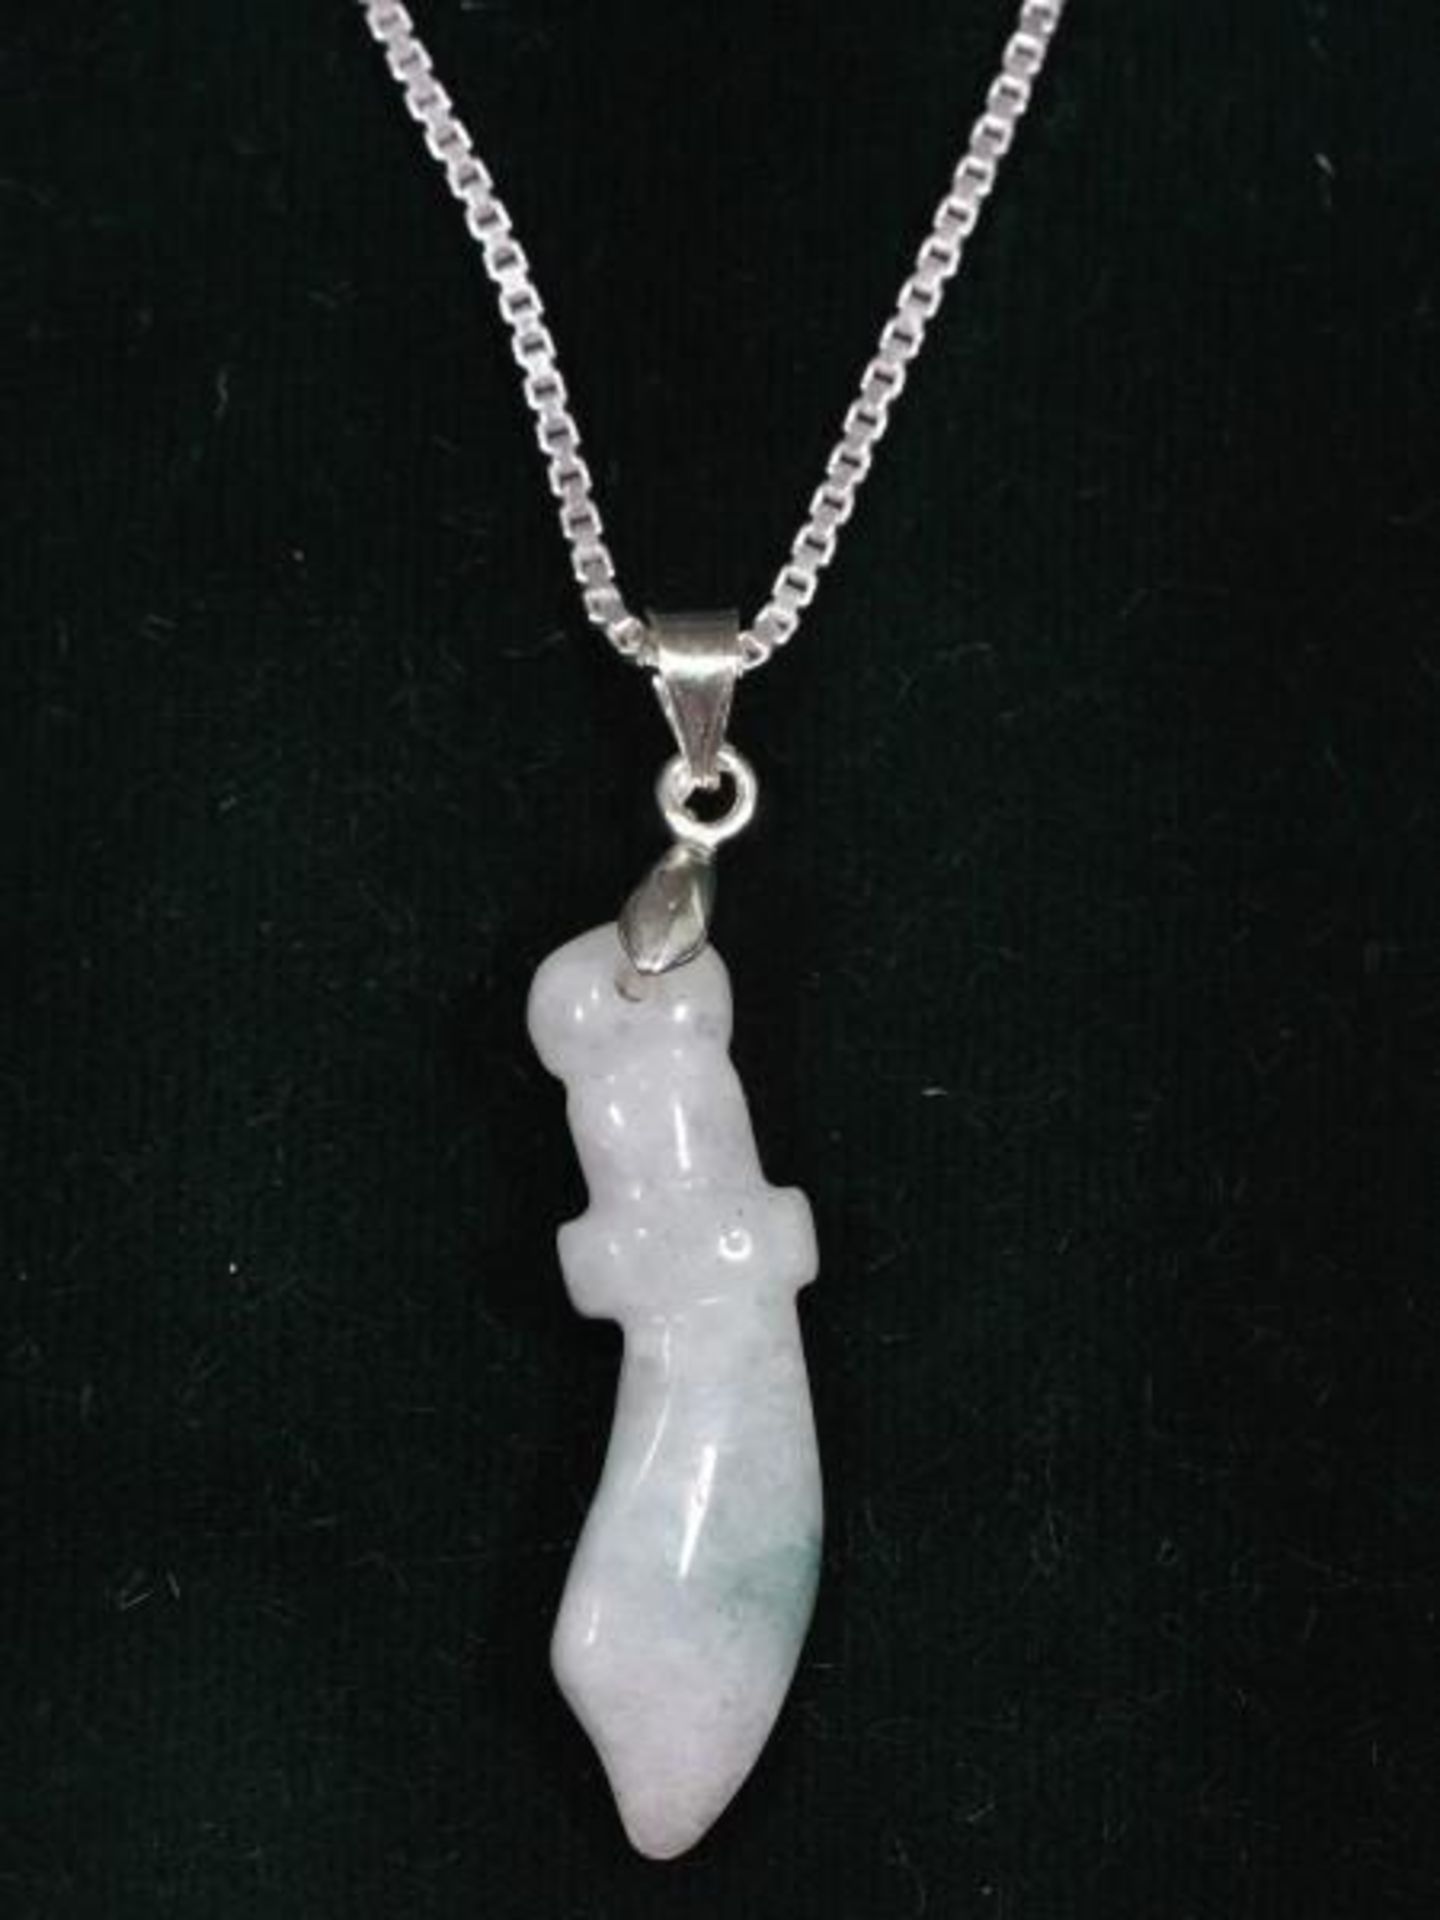 Genuine Carved Jadedide Pendant in Sword Shaped with Chain. Retail $160 (MS07 - 17)